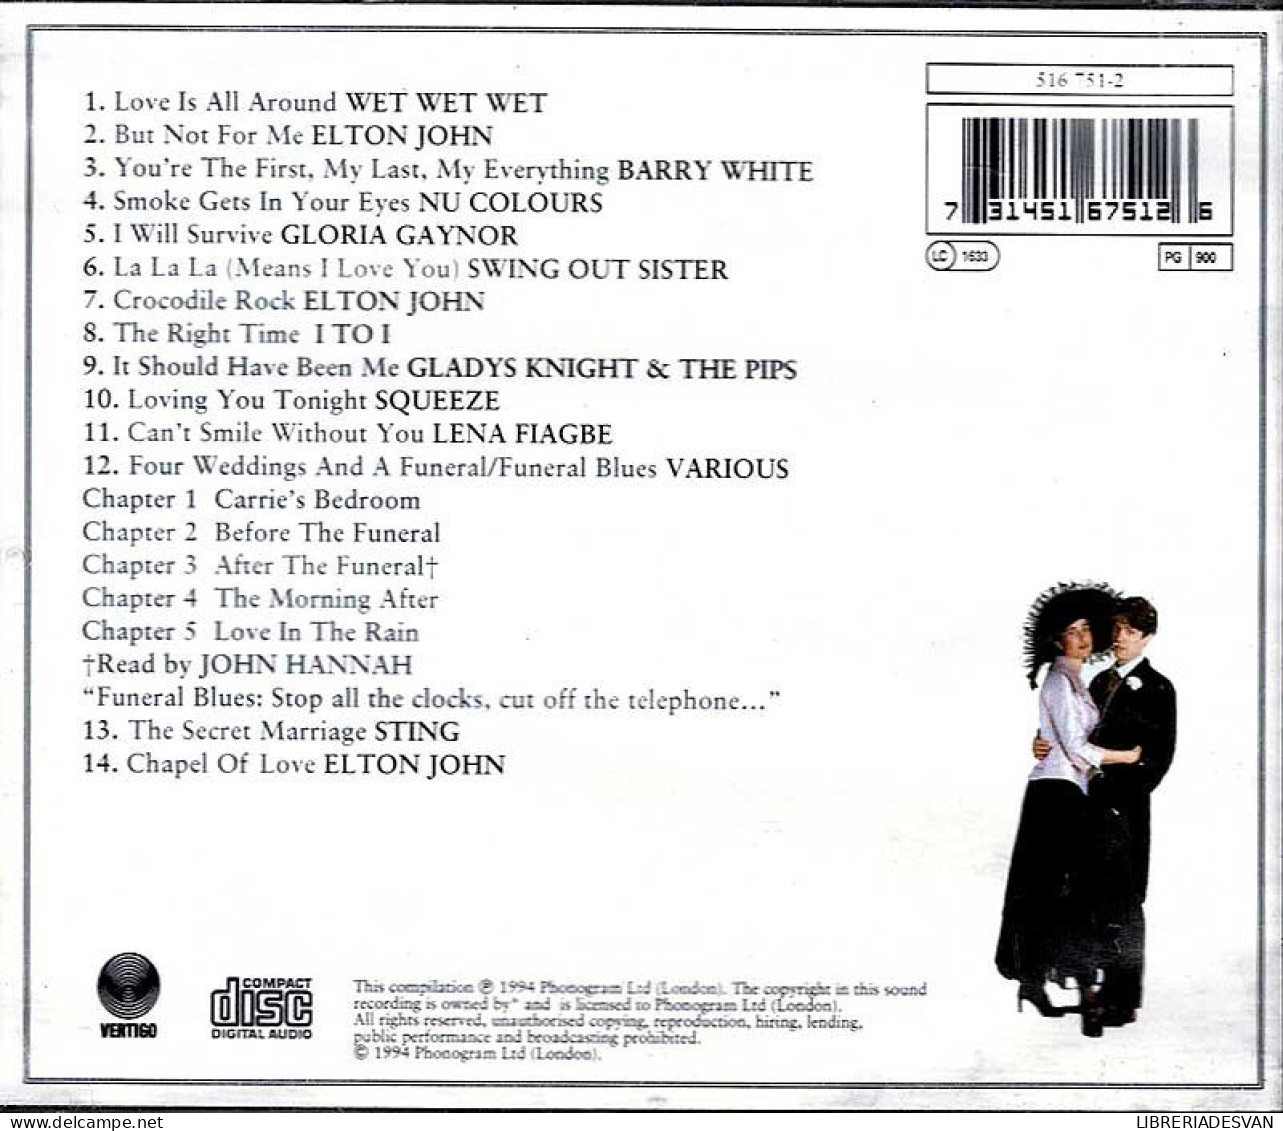 Four Weddings And A Funeral (Songs From And Inspired By The Film). CD - Soundtracks, Film Music